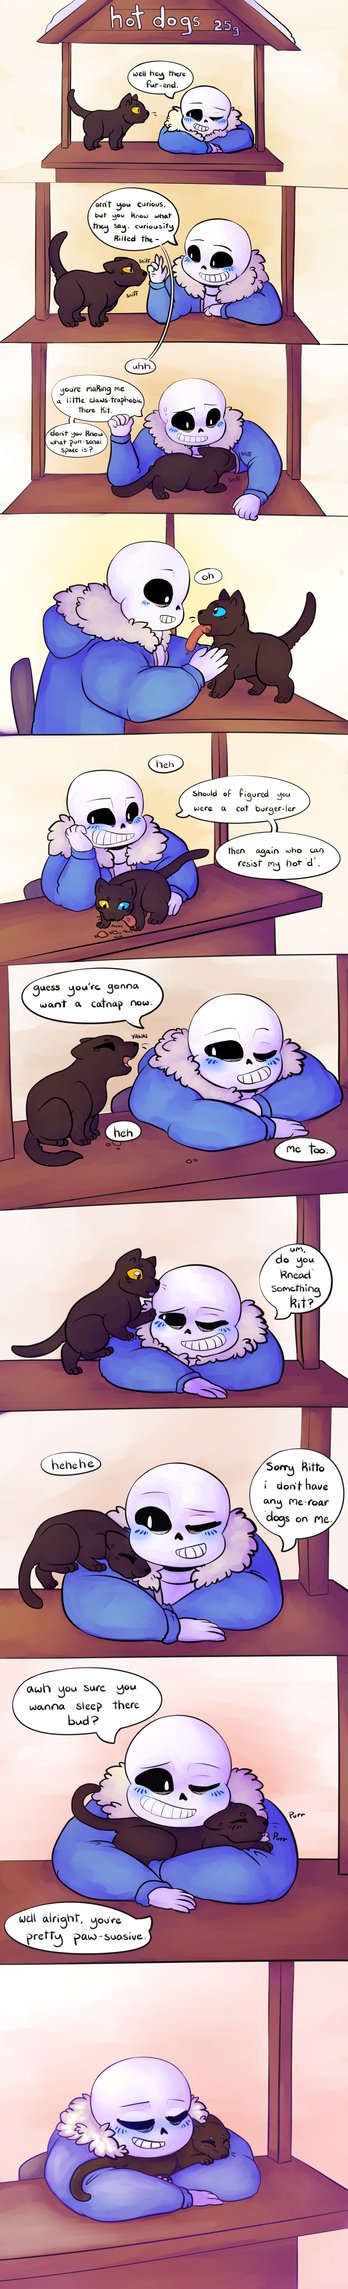 Undertale A Furry Pawsible Situation By Captainclovey